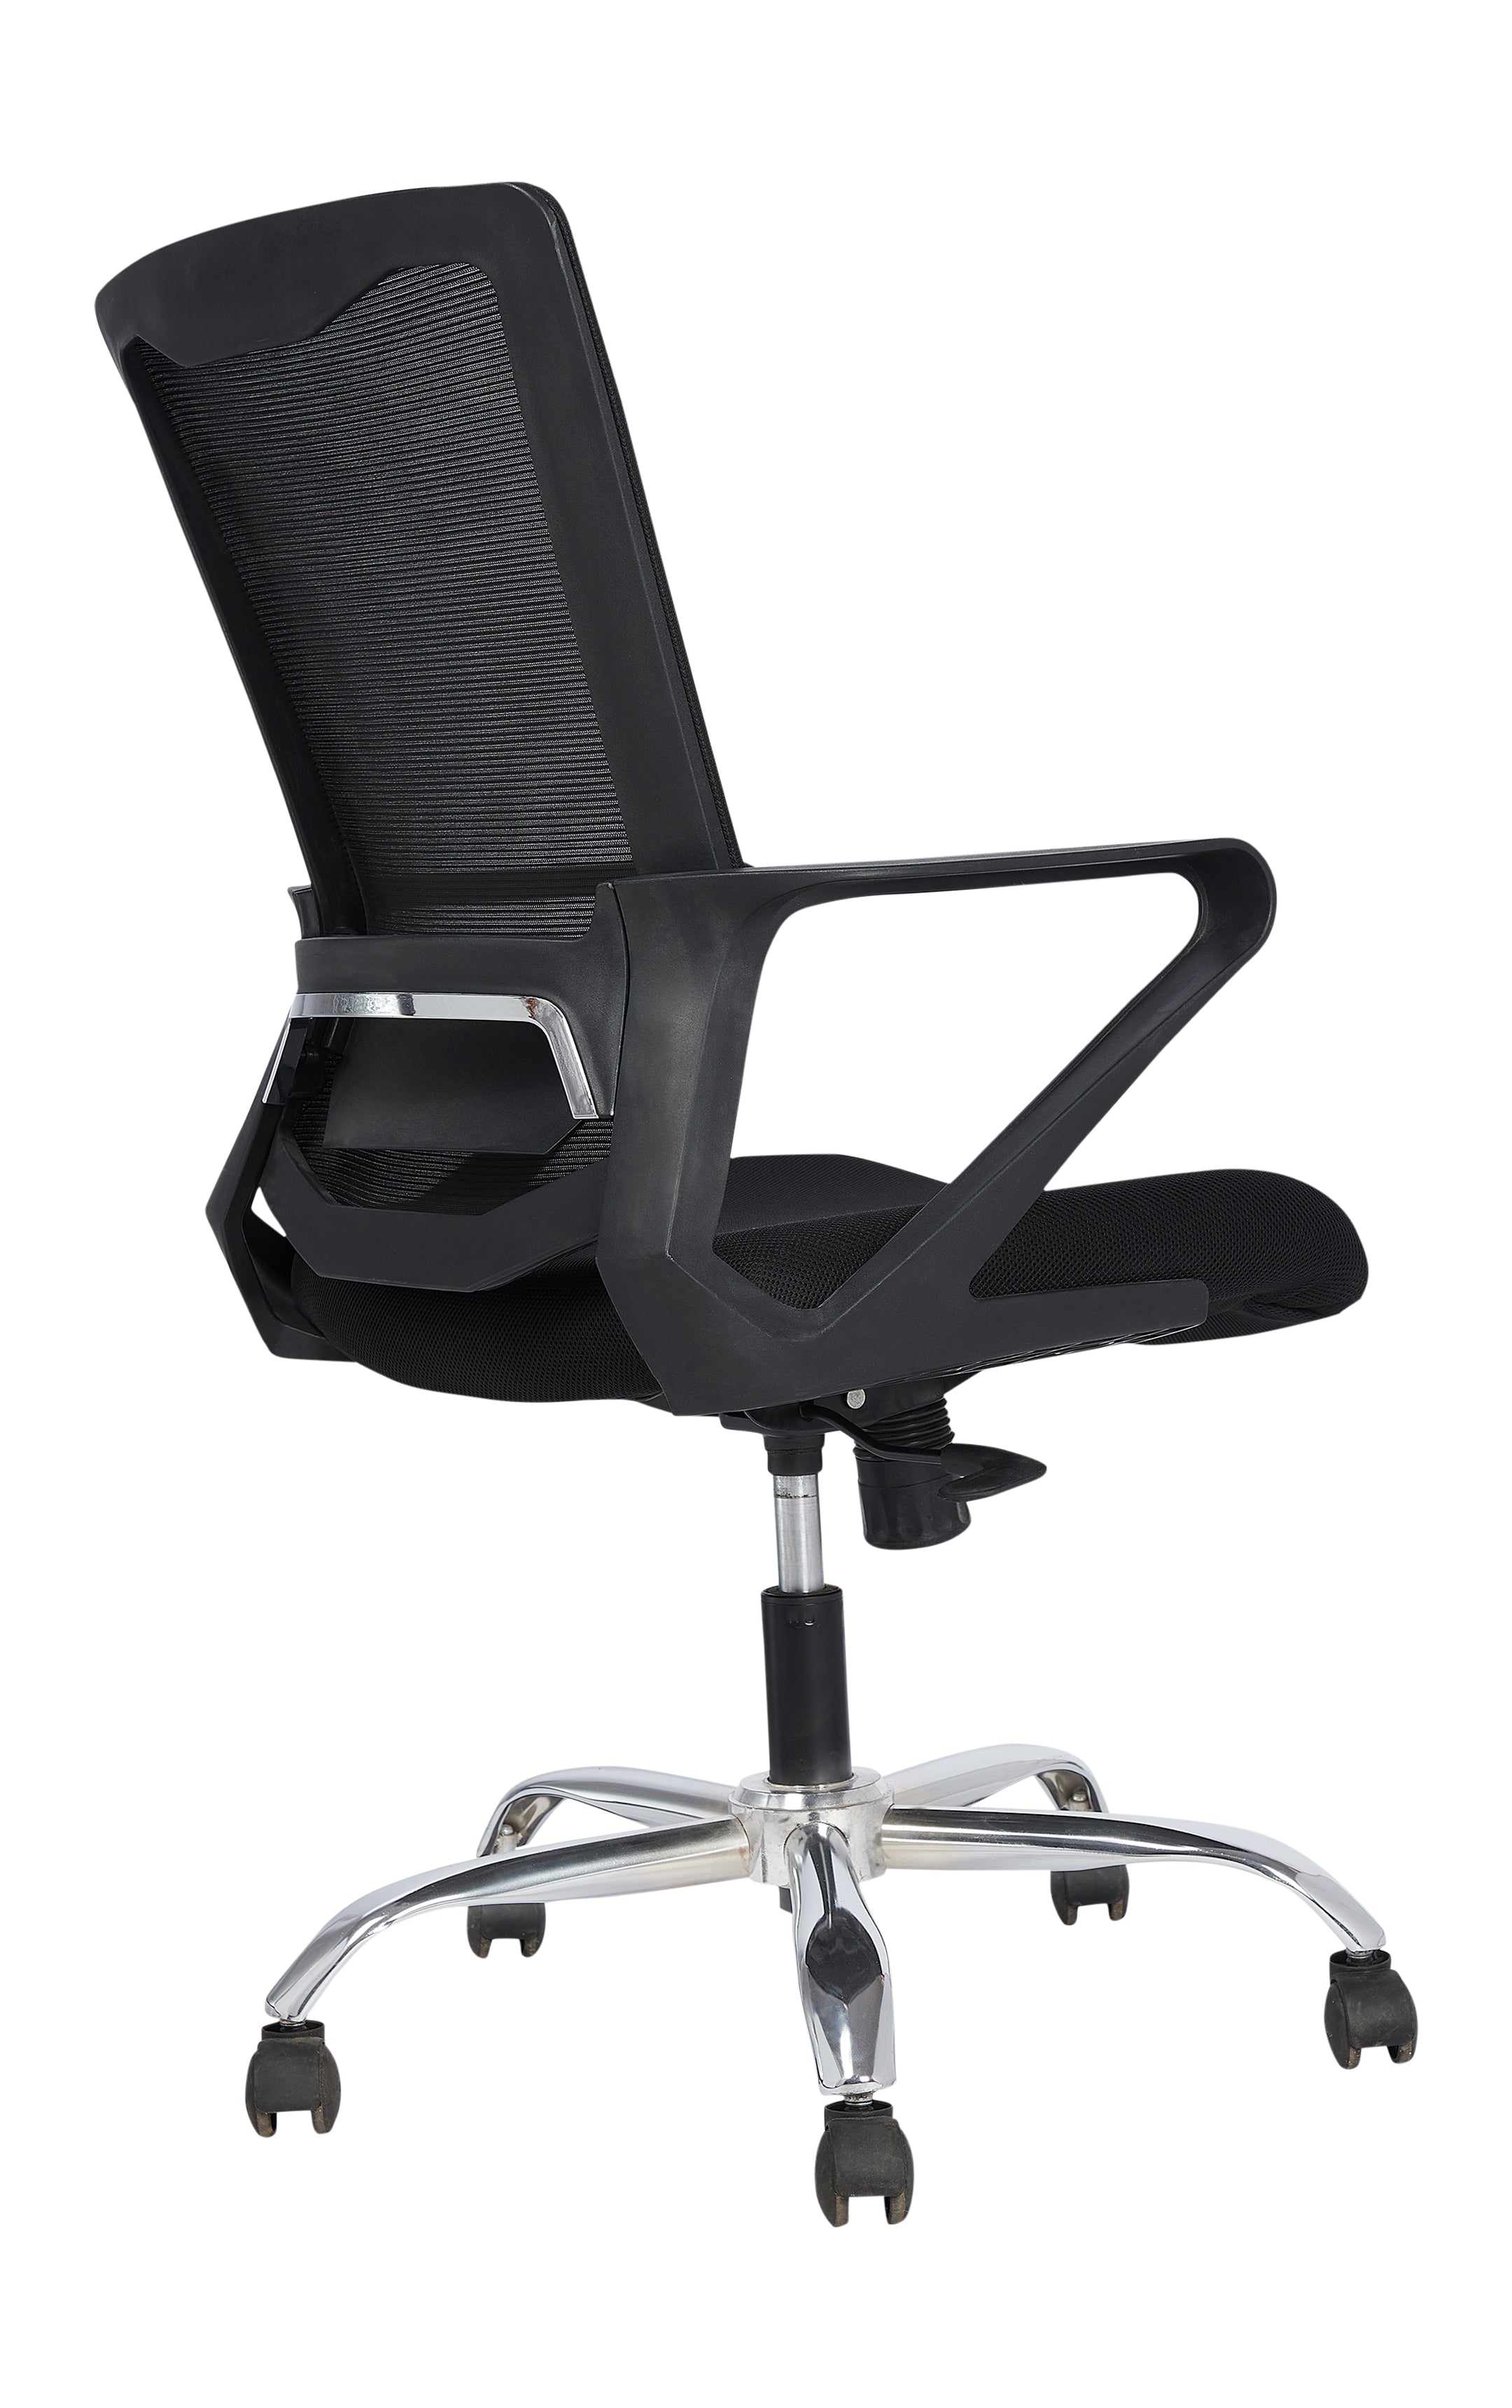 Rico Mid Back Ergonomic Office Chair With Cushion Seat And Chrome Base - Black